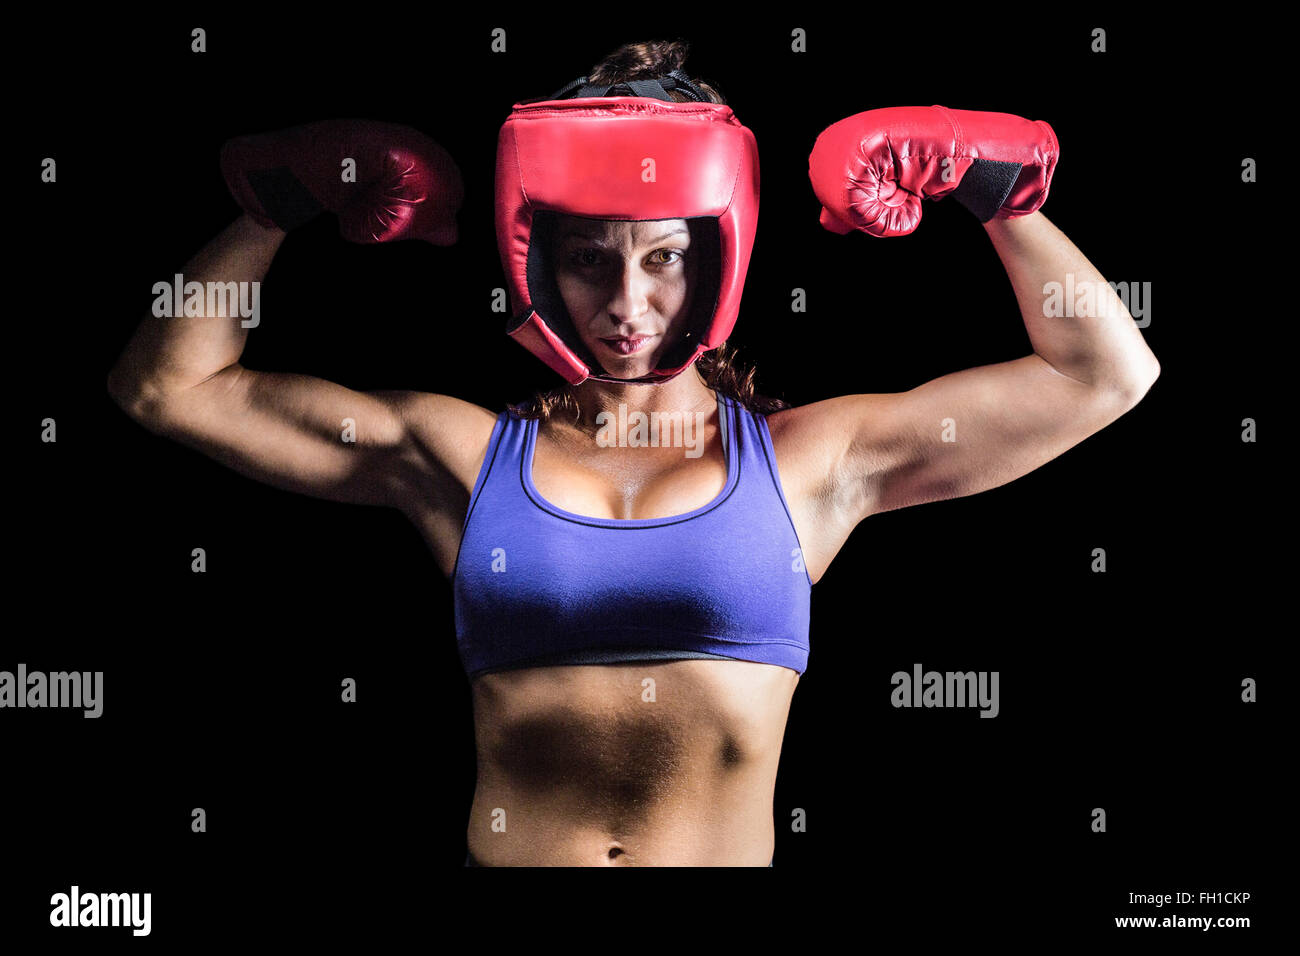 Muscle Woman Fighting: Over 15,905 Royalty-Free Licensable Stock